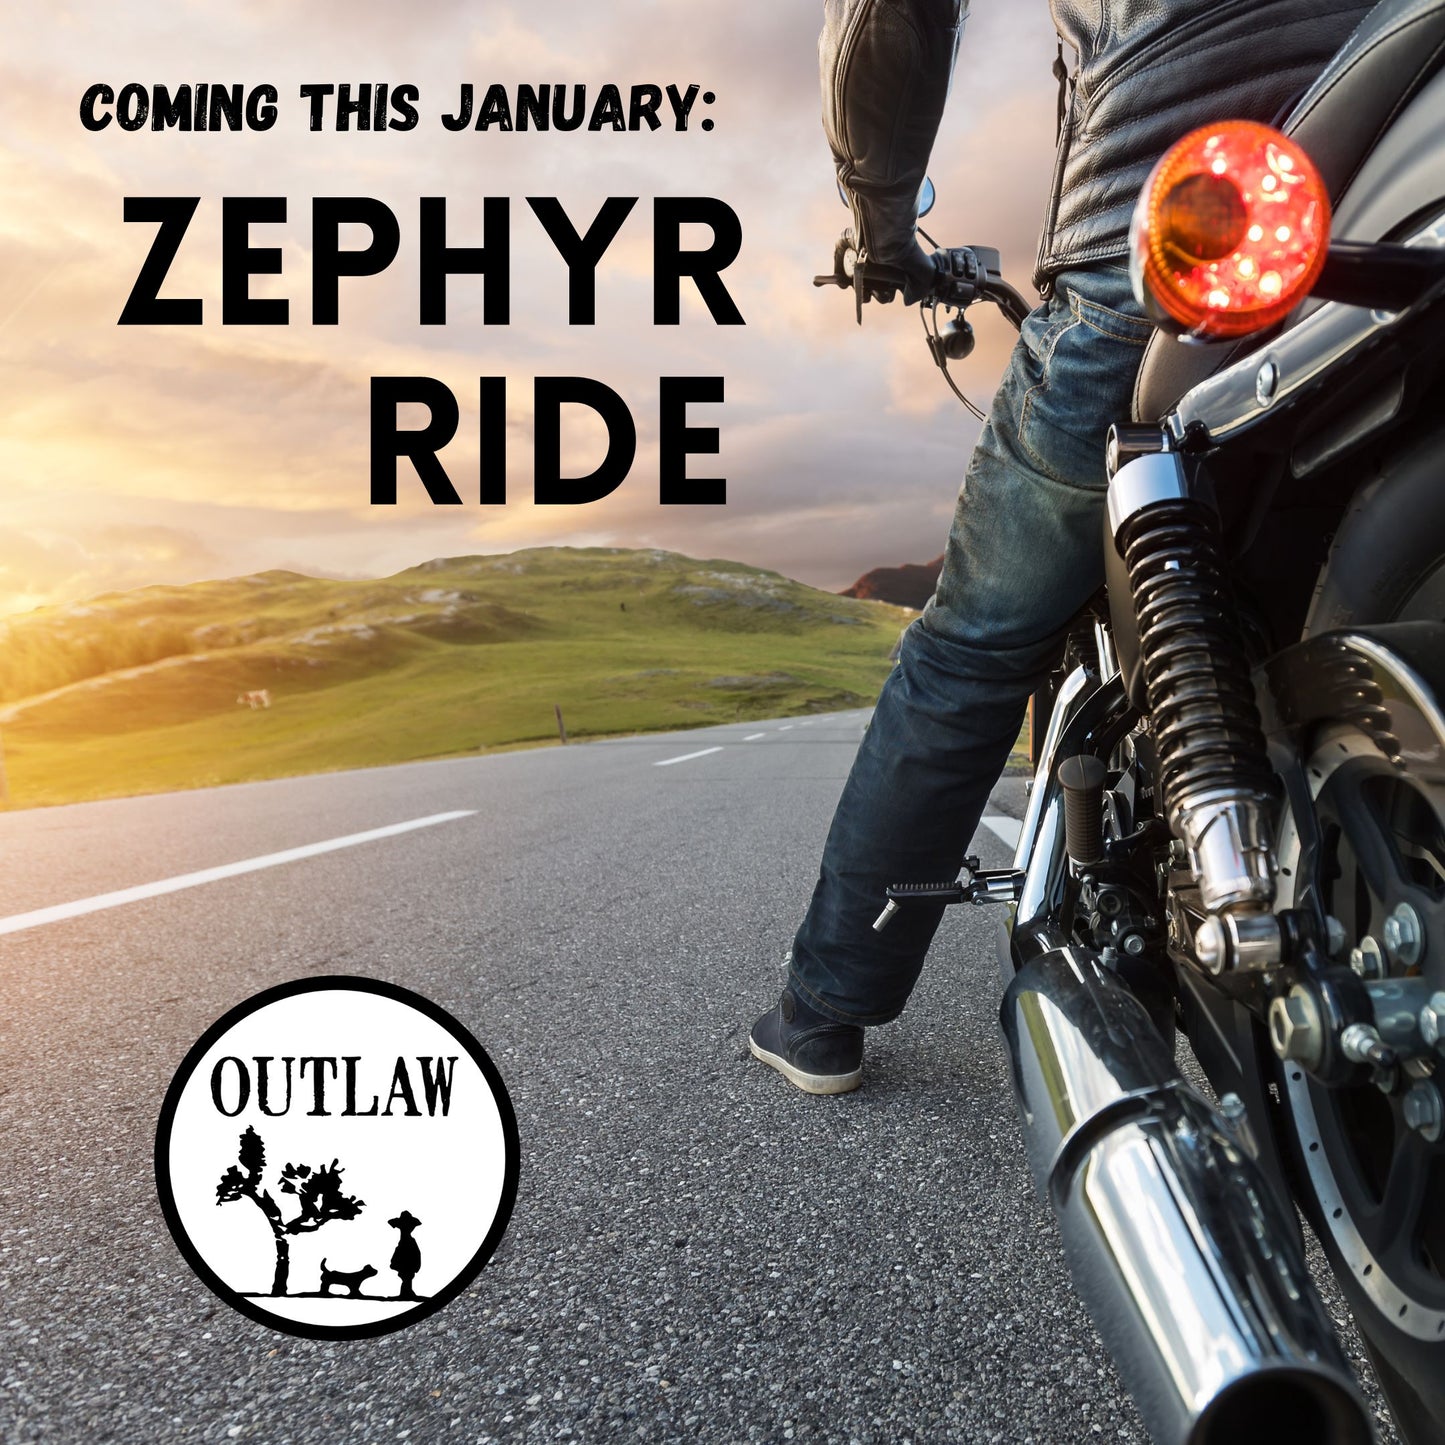 Outlaw Zephyr Ride Cologne